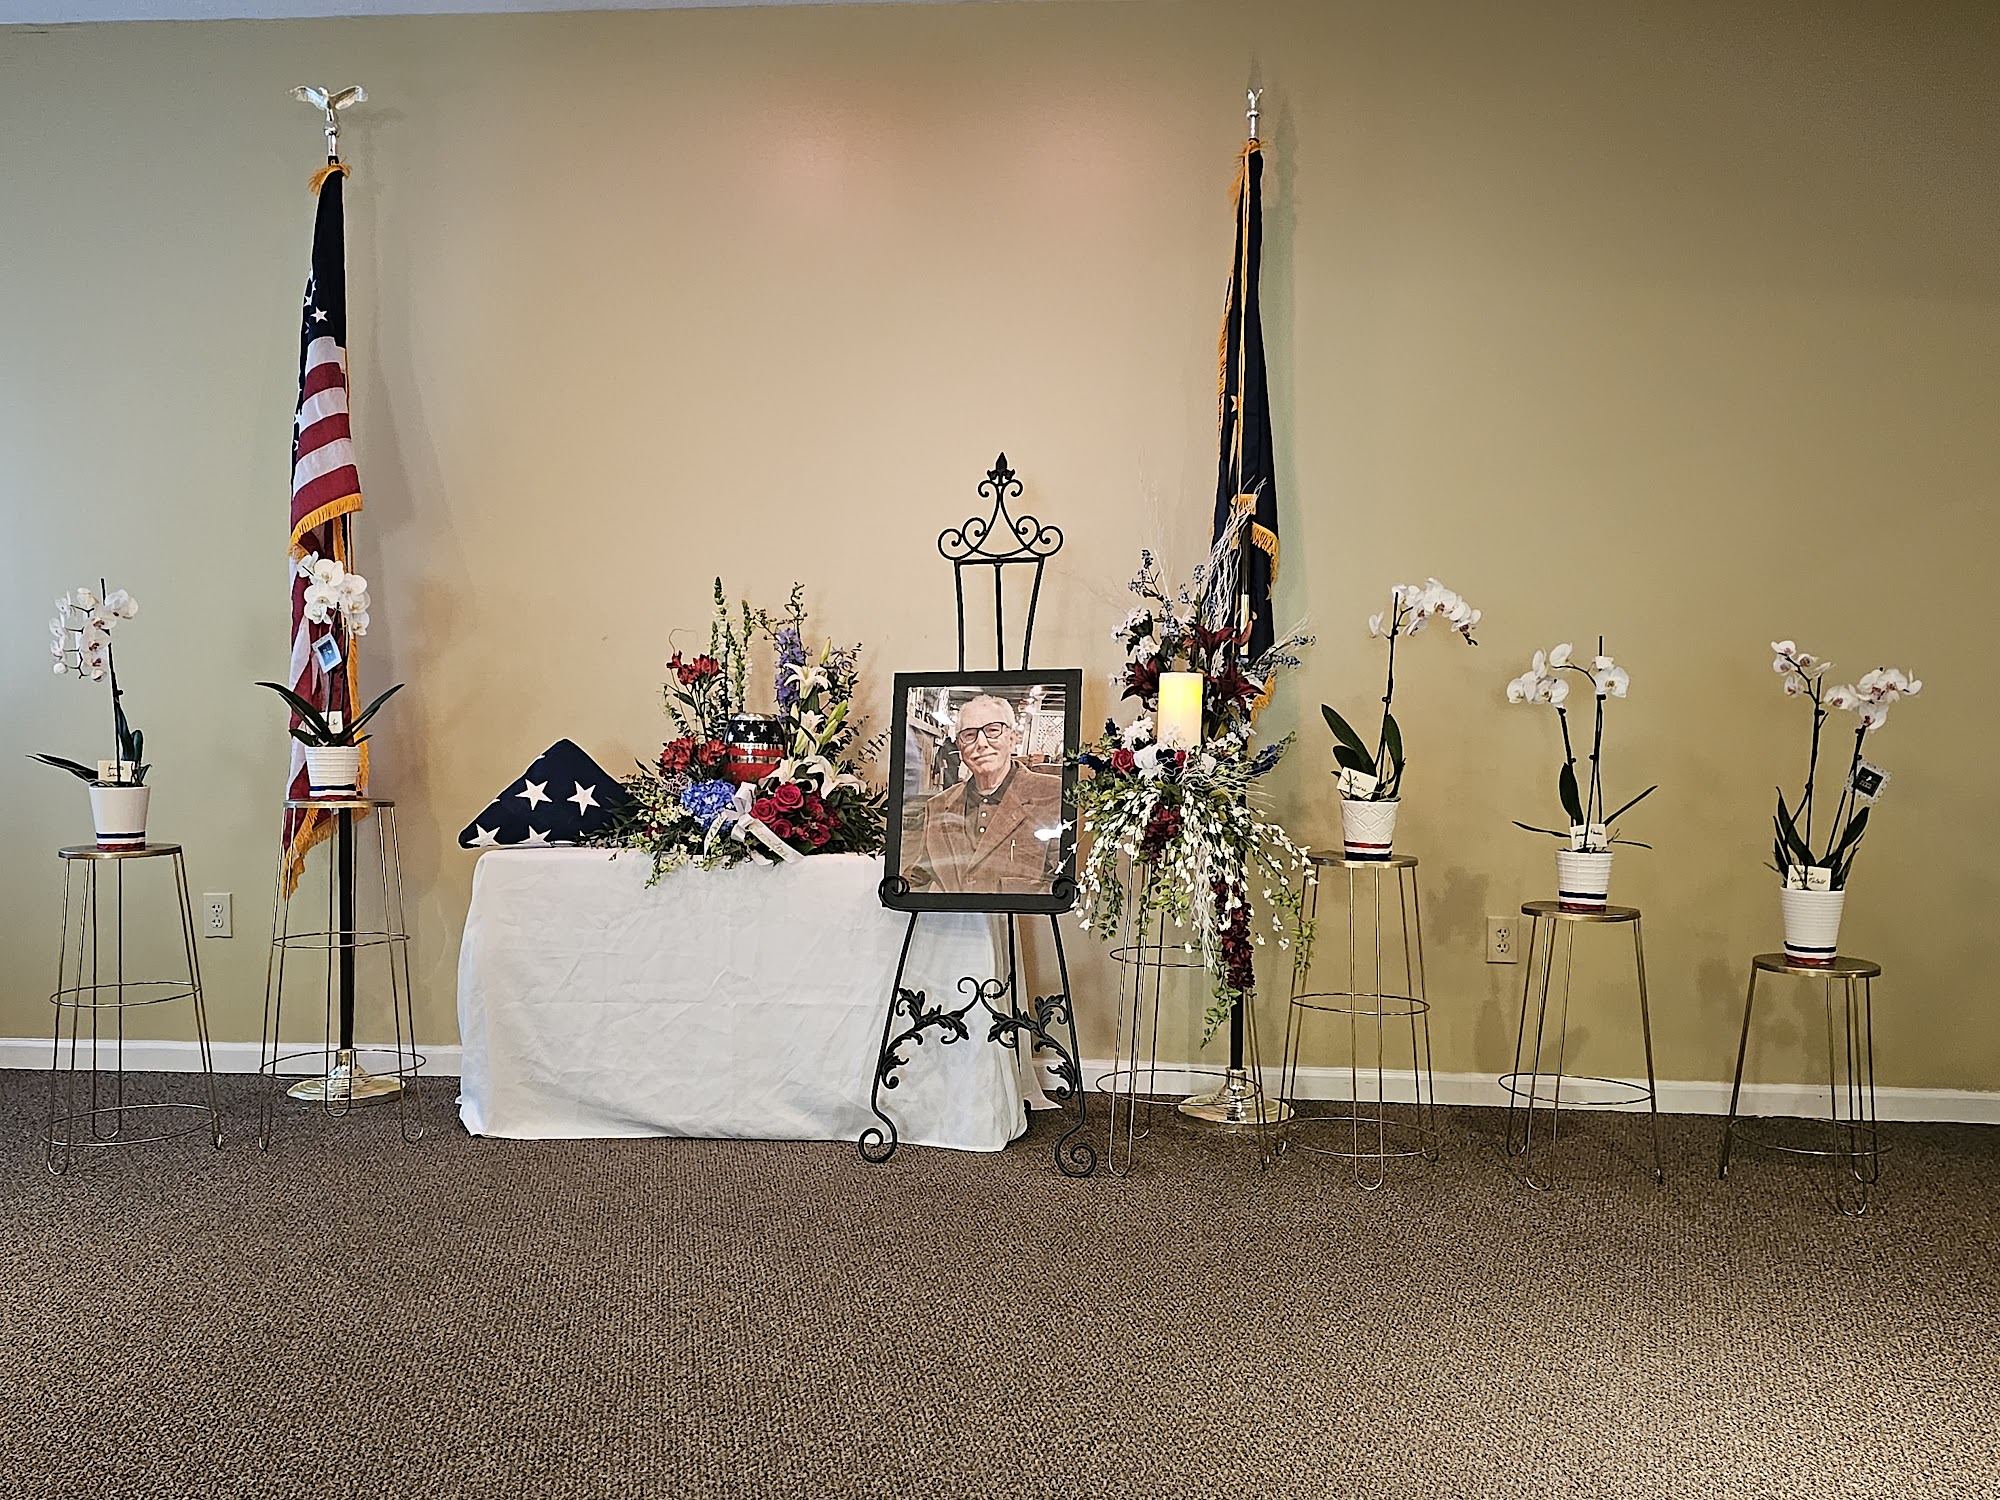 Jessen Funeral Home & Simple Cremation